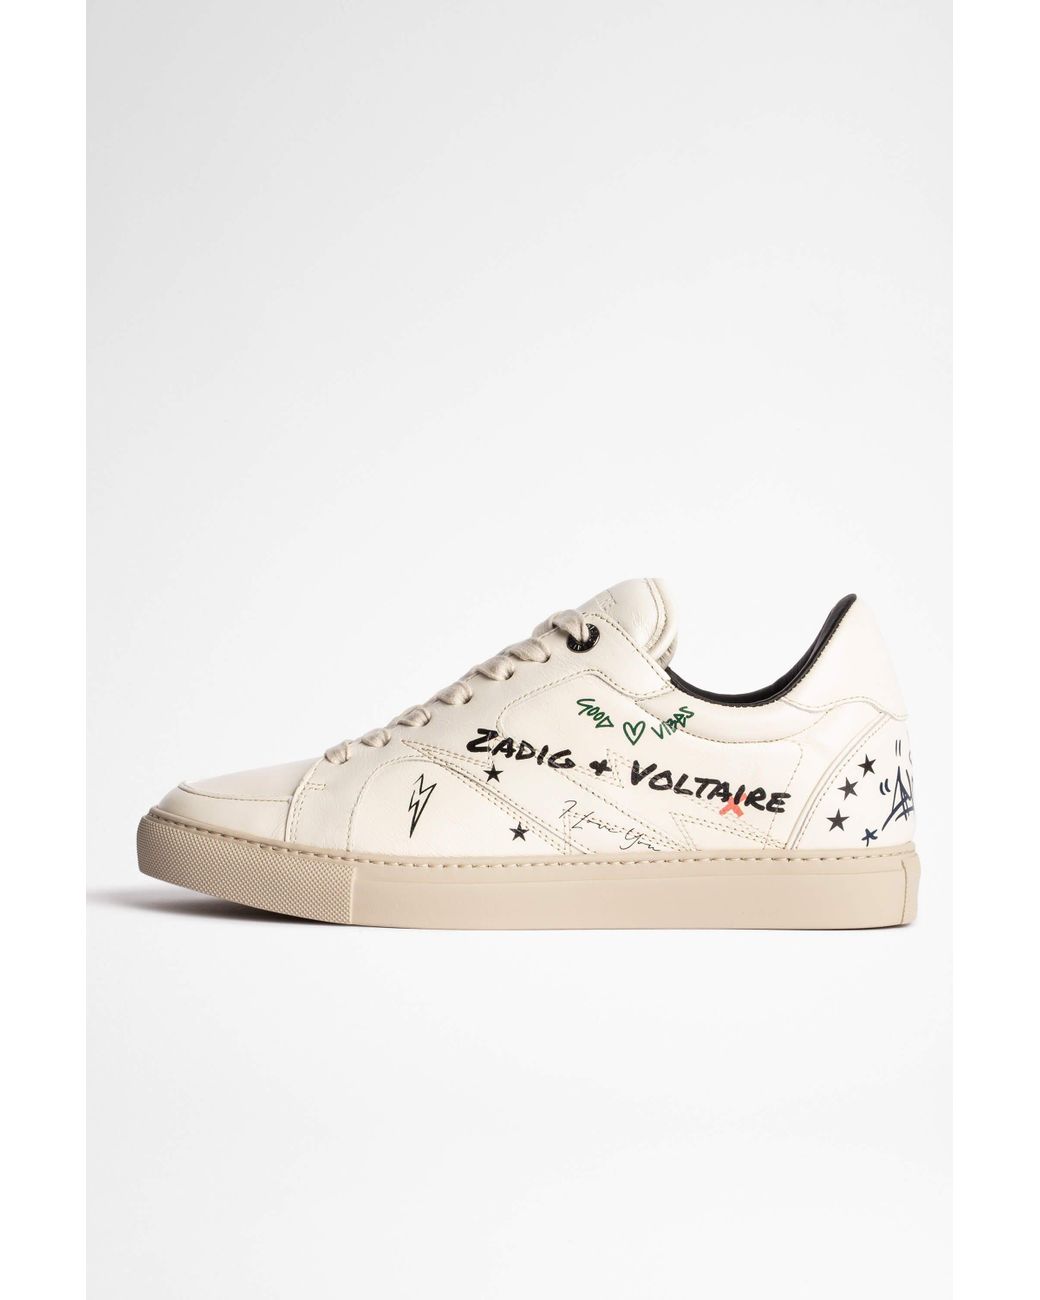 Zadig & Voltaire Zv1747 Board Crush Sneakers Leather in White | Lyst